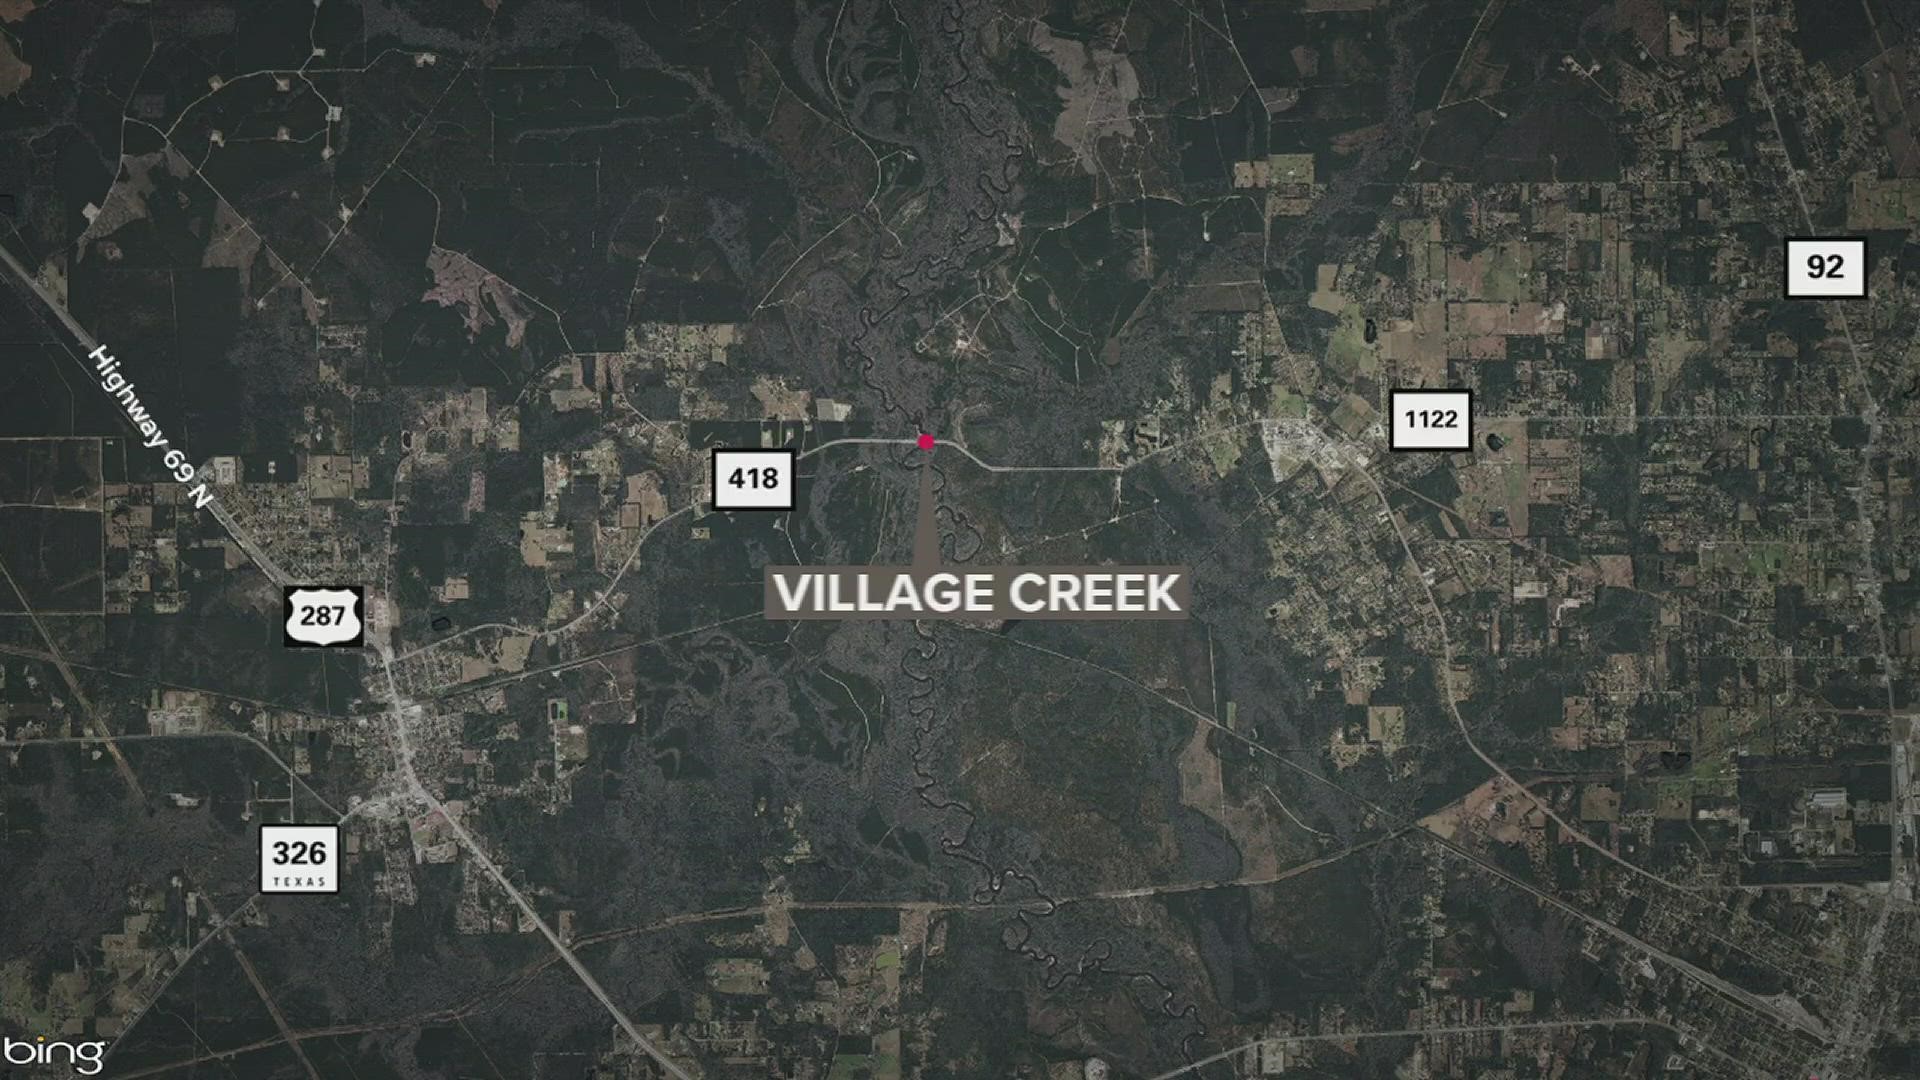 Two women were kayaking on the creek in separate kayaks when both overturned.